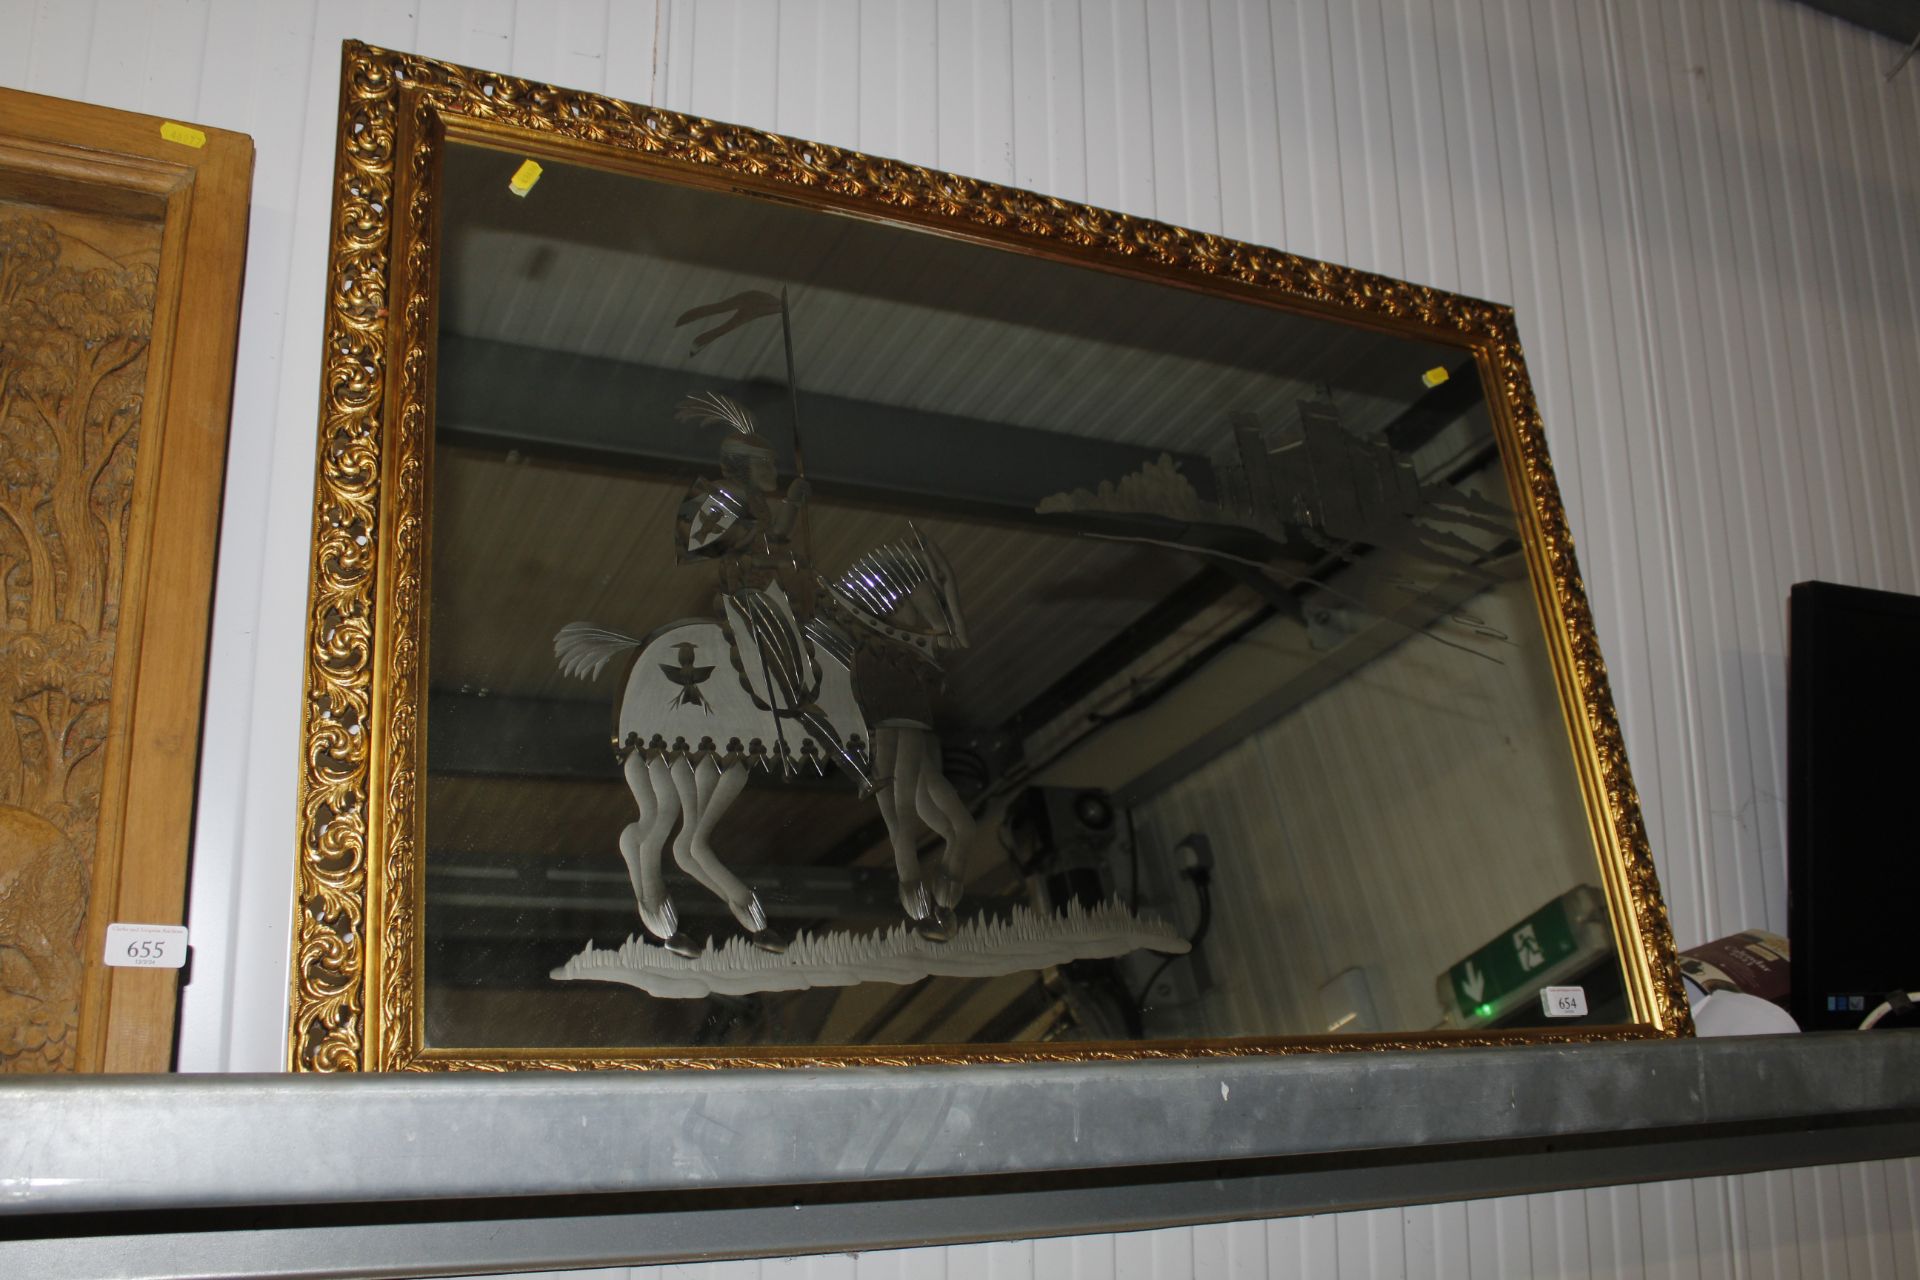 A decorative gilt frame wall mirror with etched de